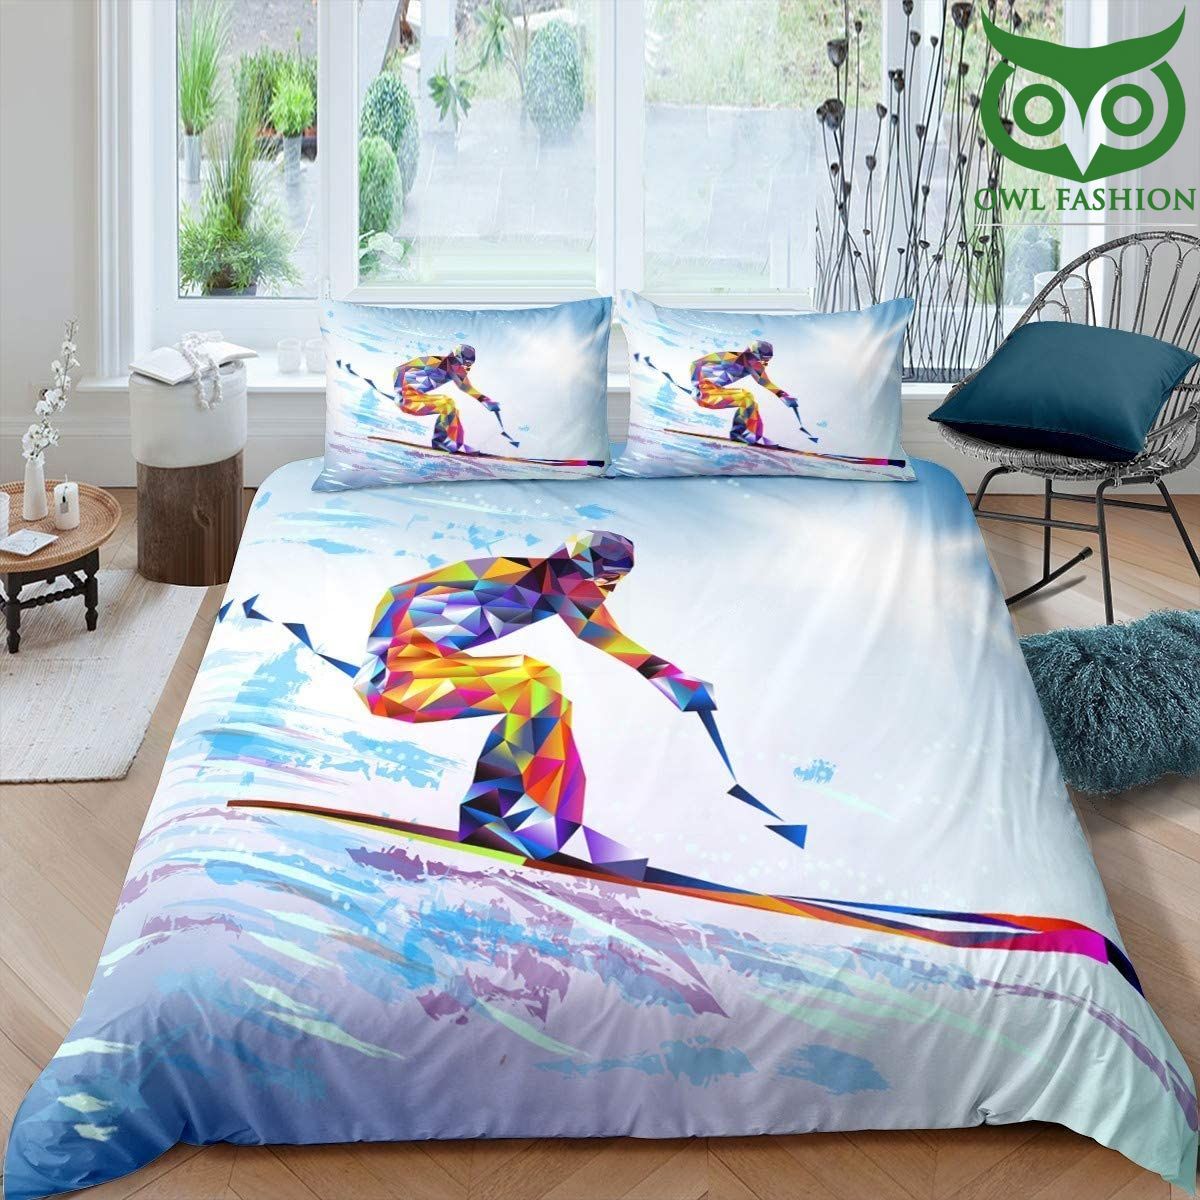 34 Skiing bedding set Skier water color